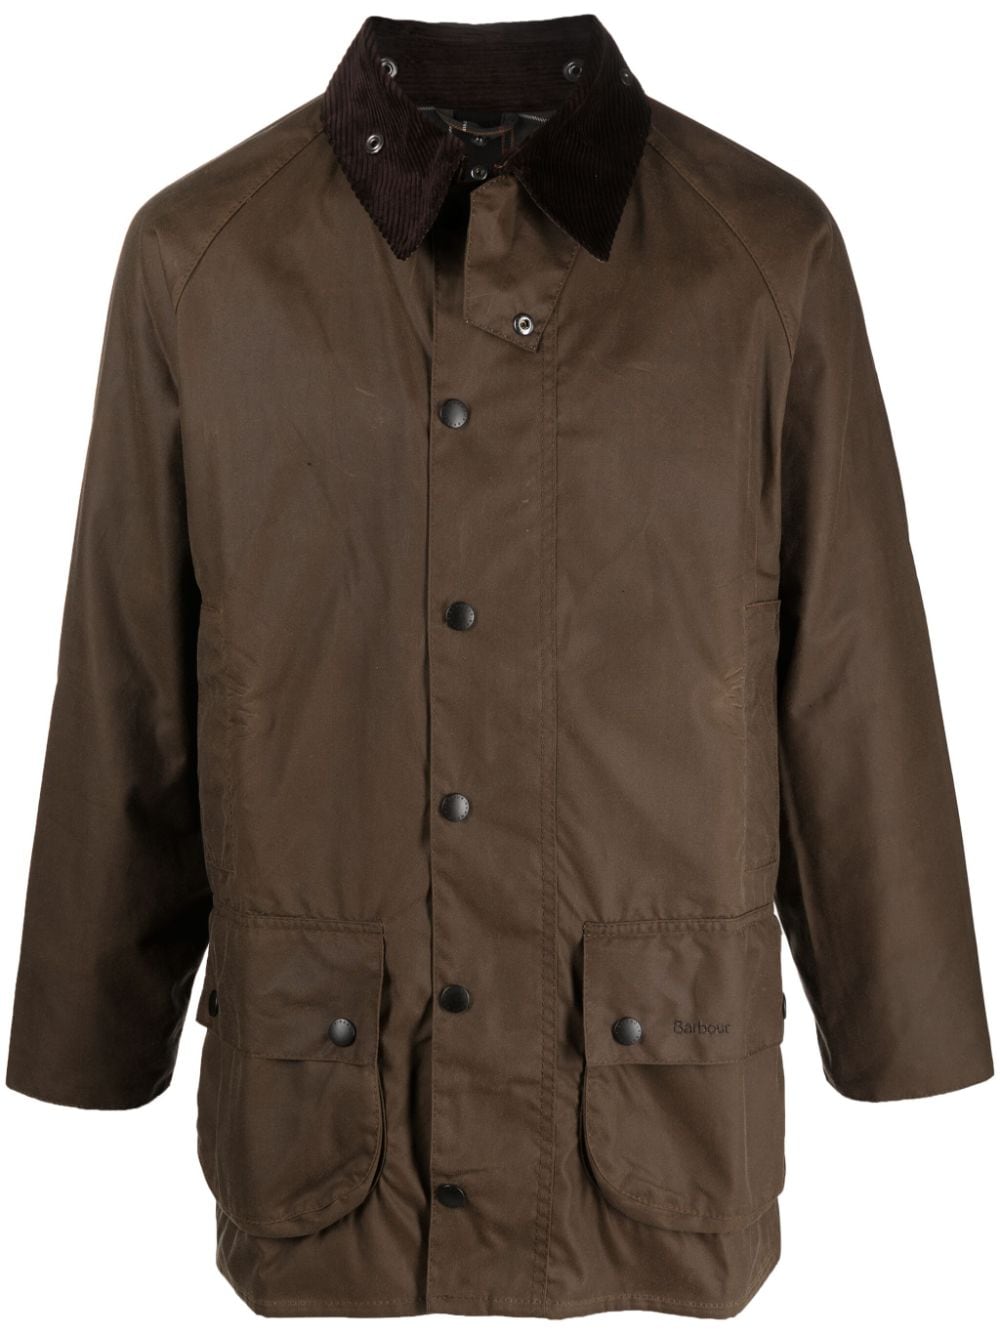 Barbour cotton wax-coated jacket - Brown